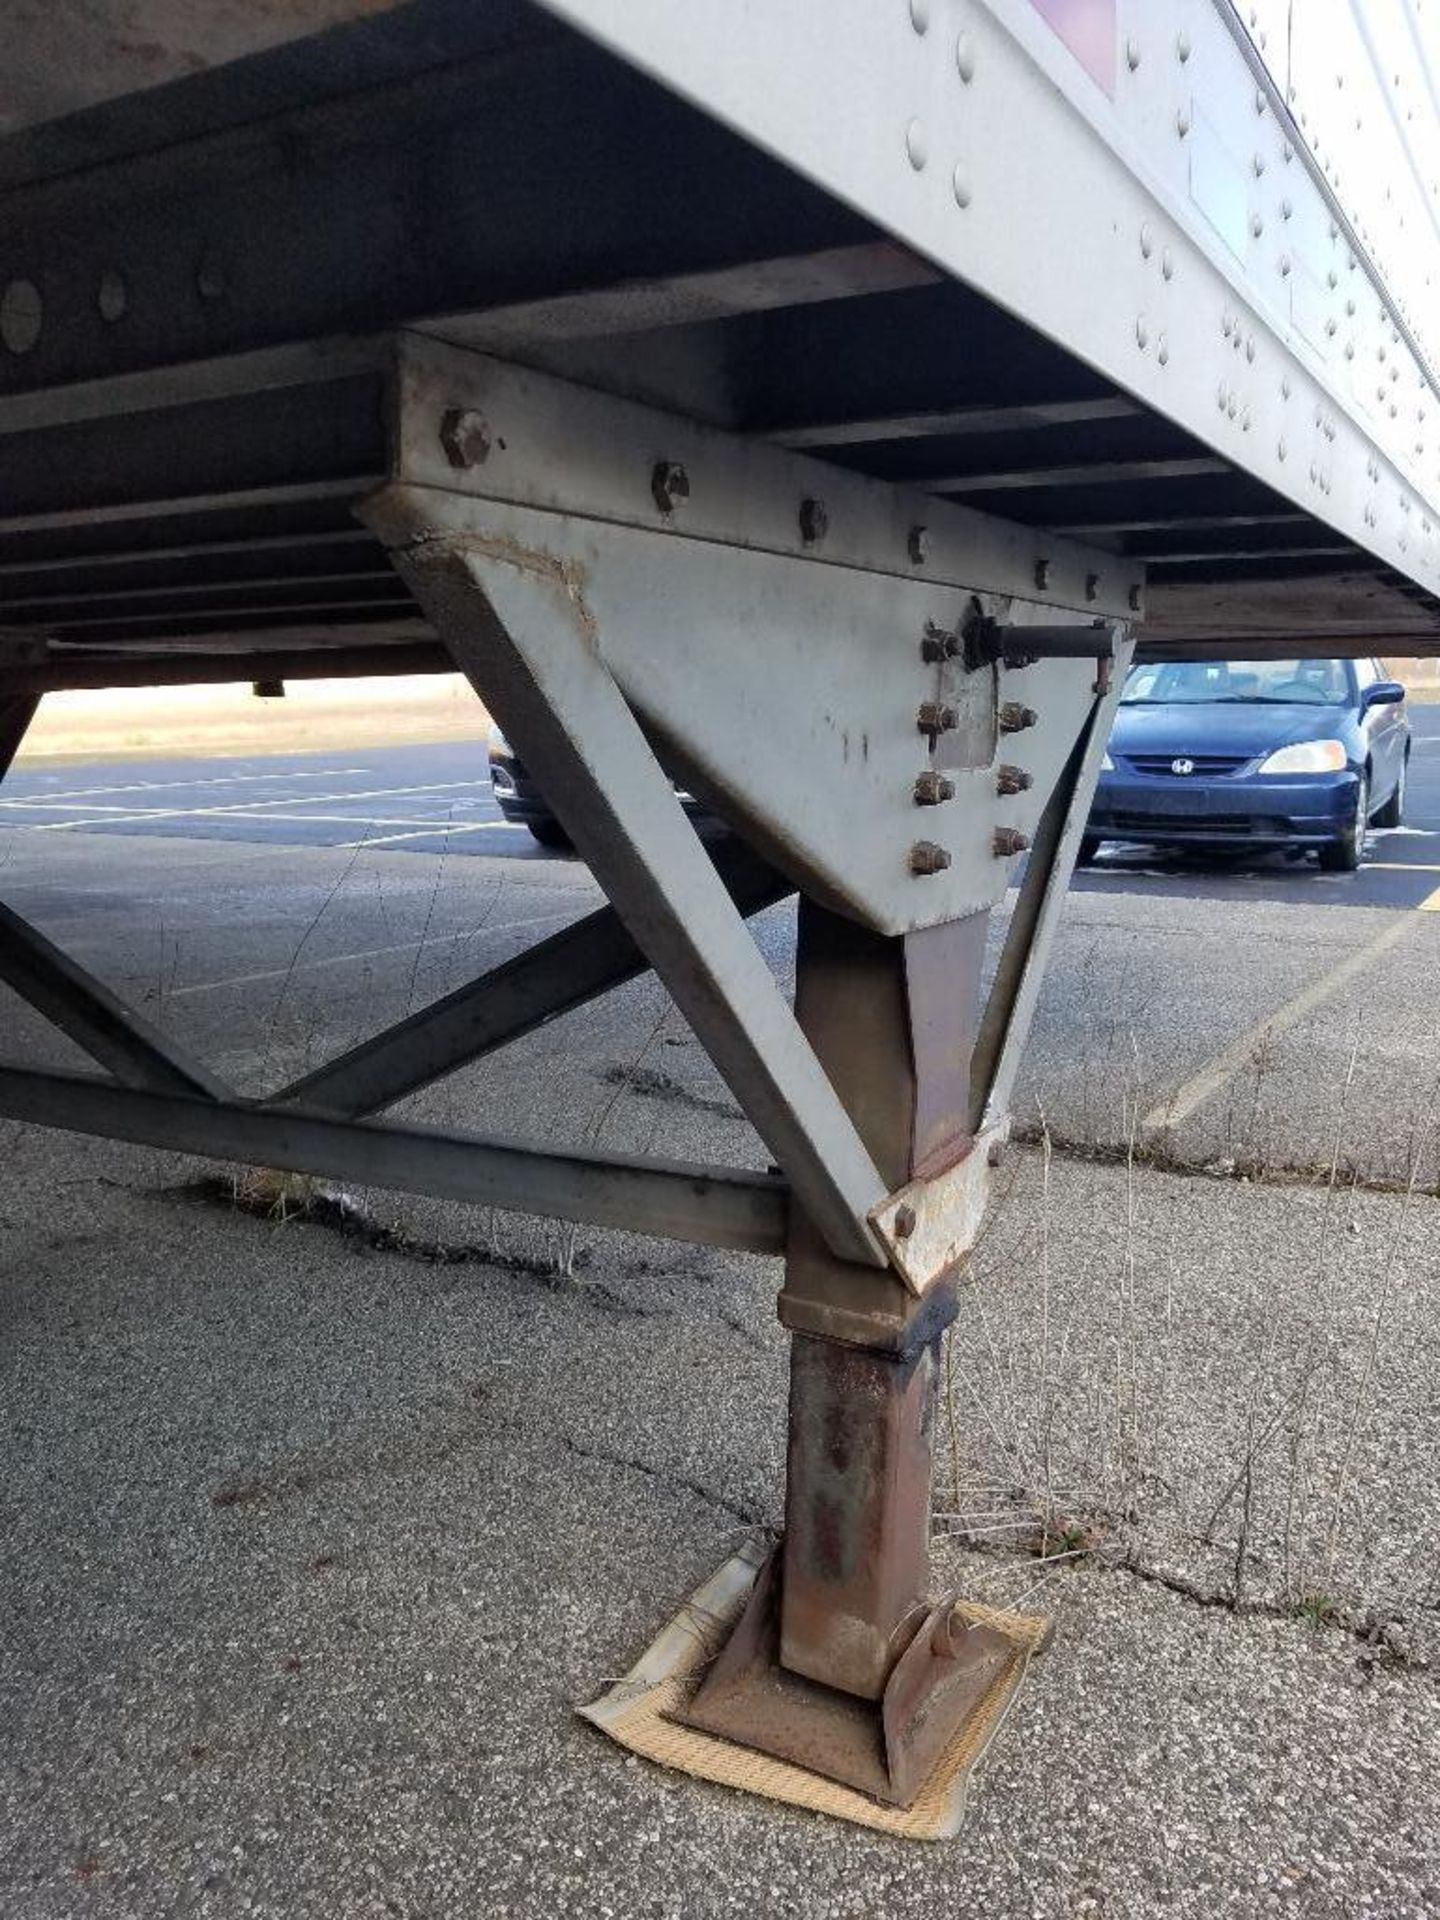 1987 Great Dane 48 ft. dry van trailer {Located in Plymouth, IN} - Image 7 of 14